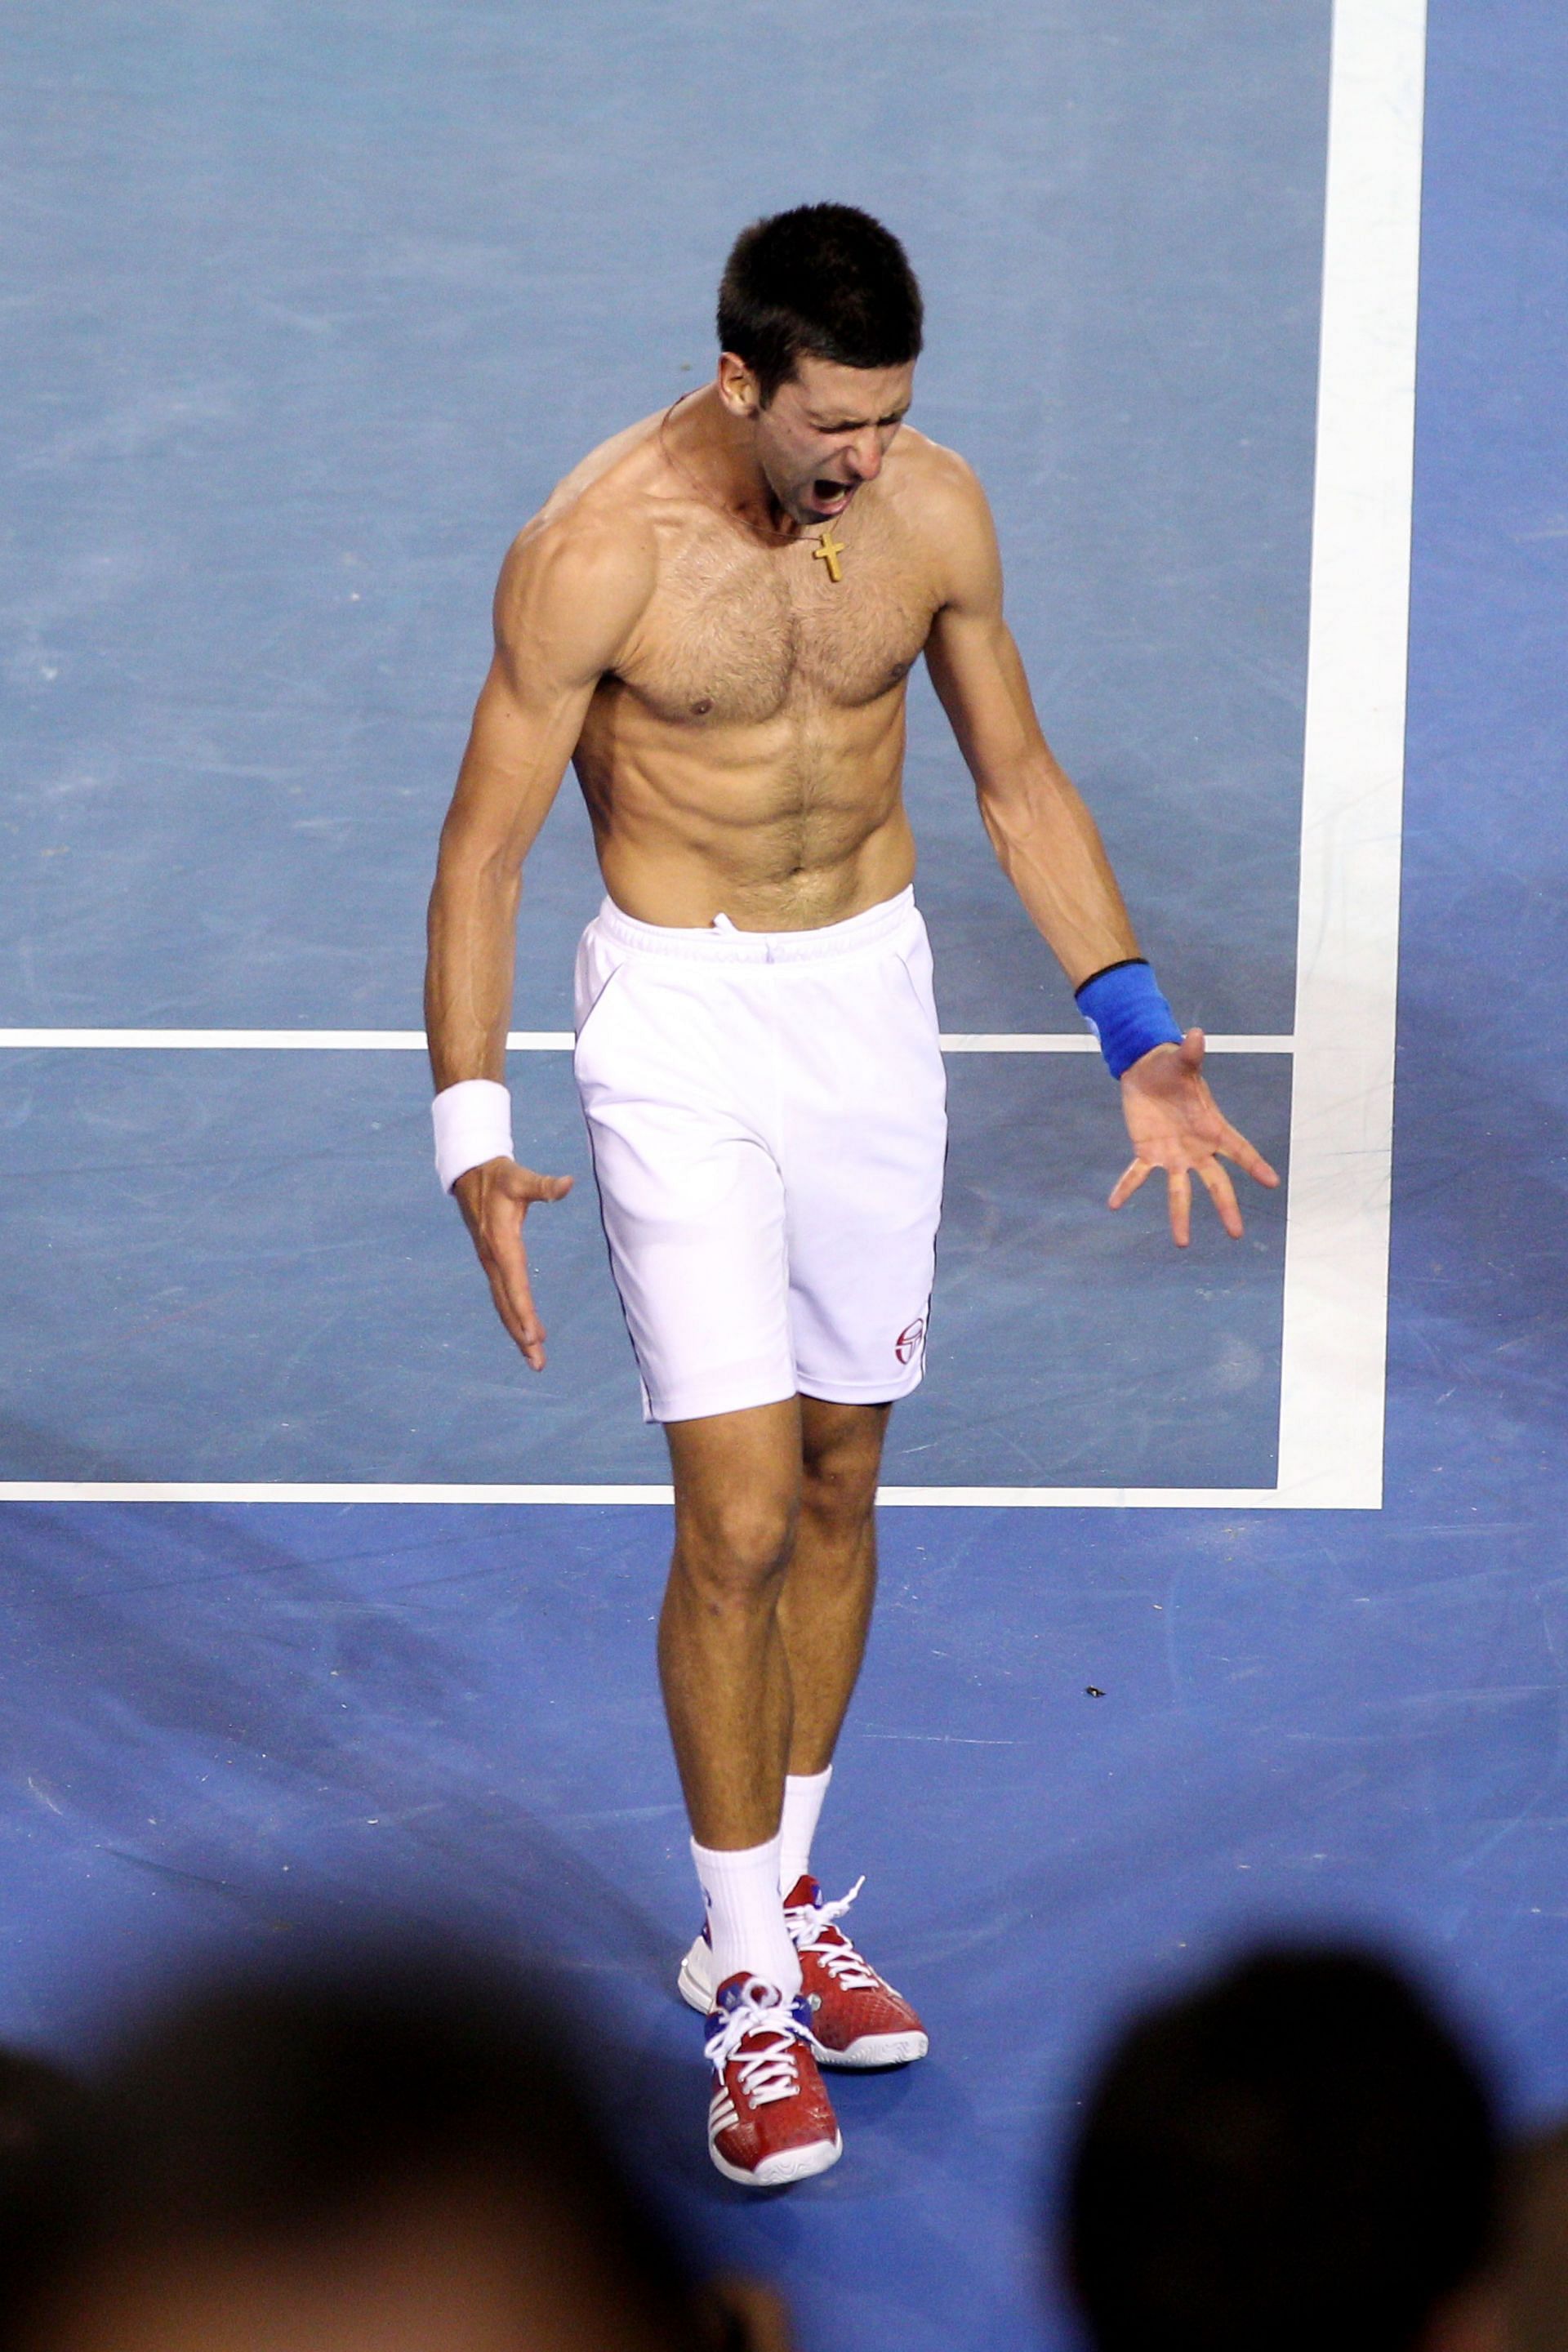 Djokovic won his third Australian Open crown in one of the greatest tennis matches of all time